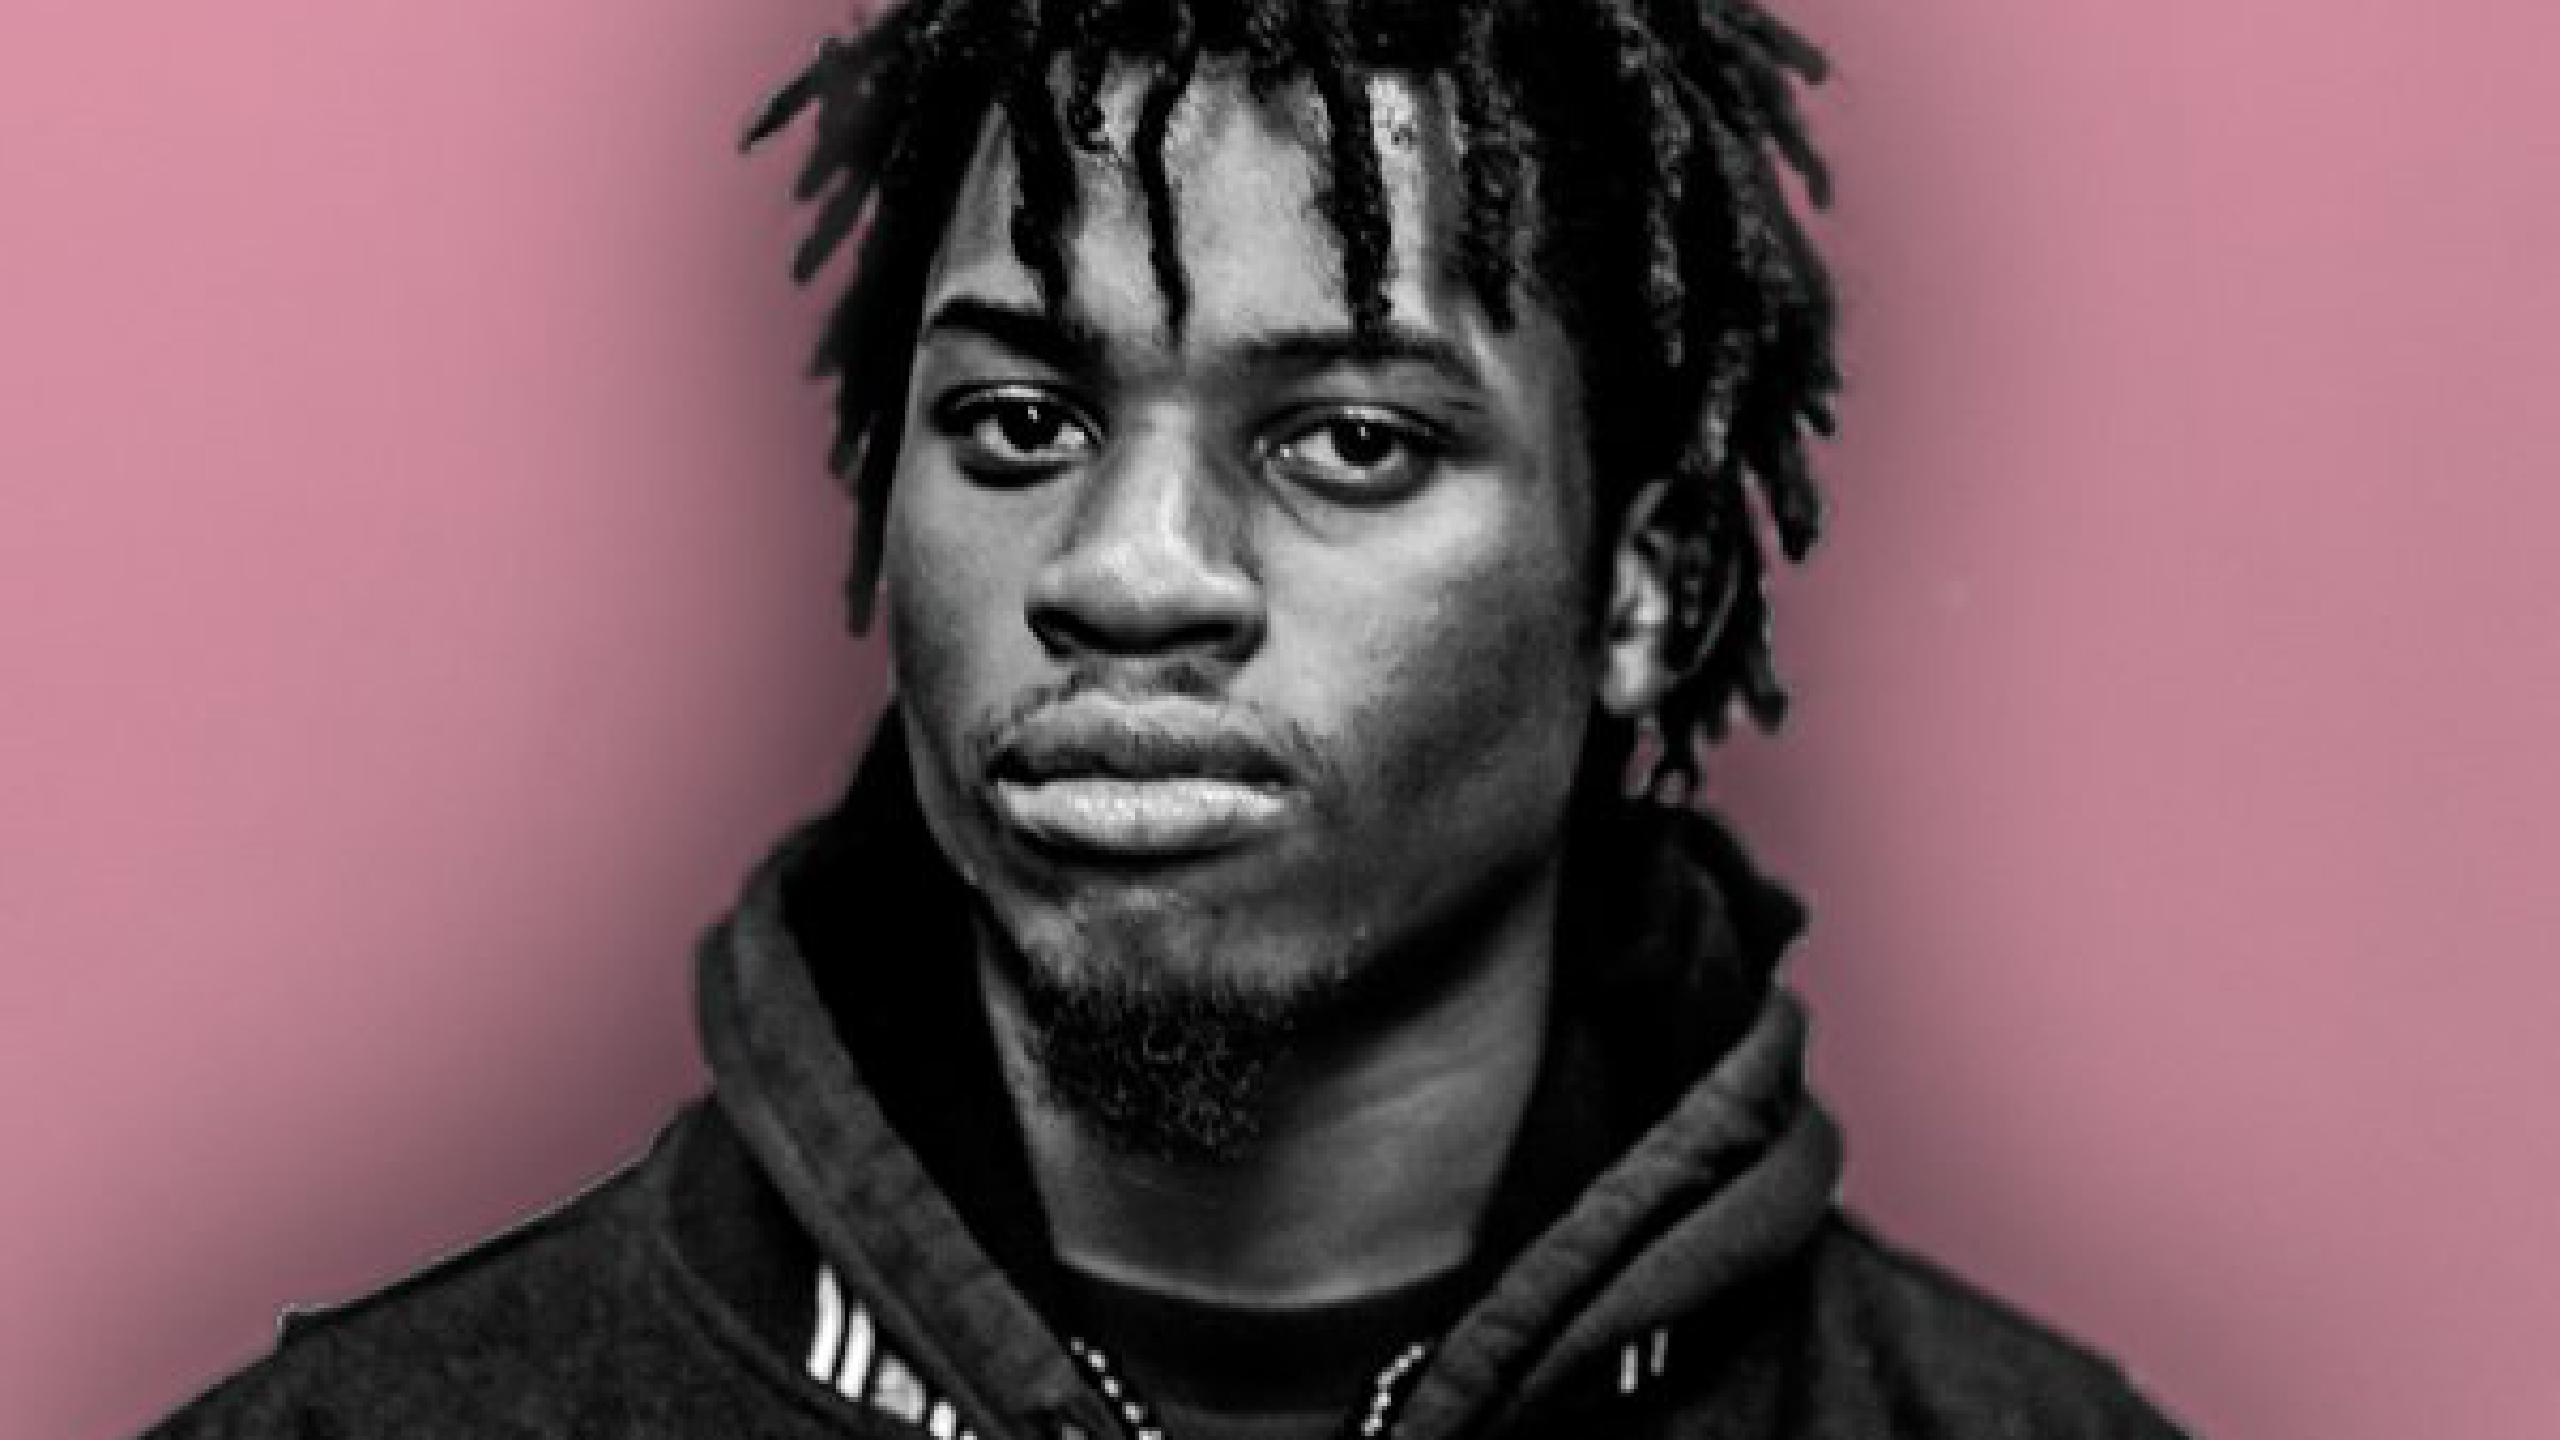 Denzel Curry tour dates 2022 2023. Denzel Curry tickets and concerts